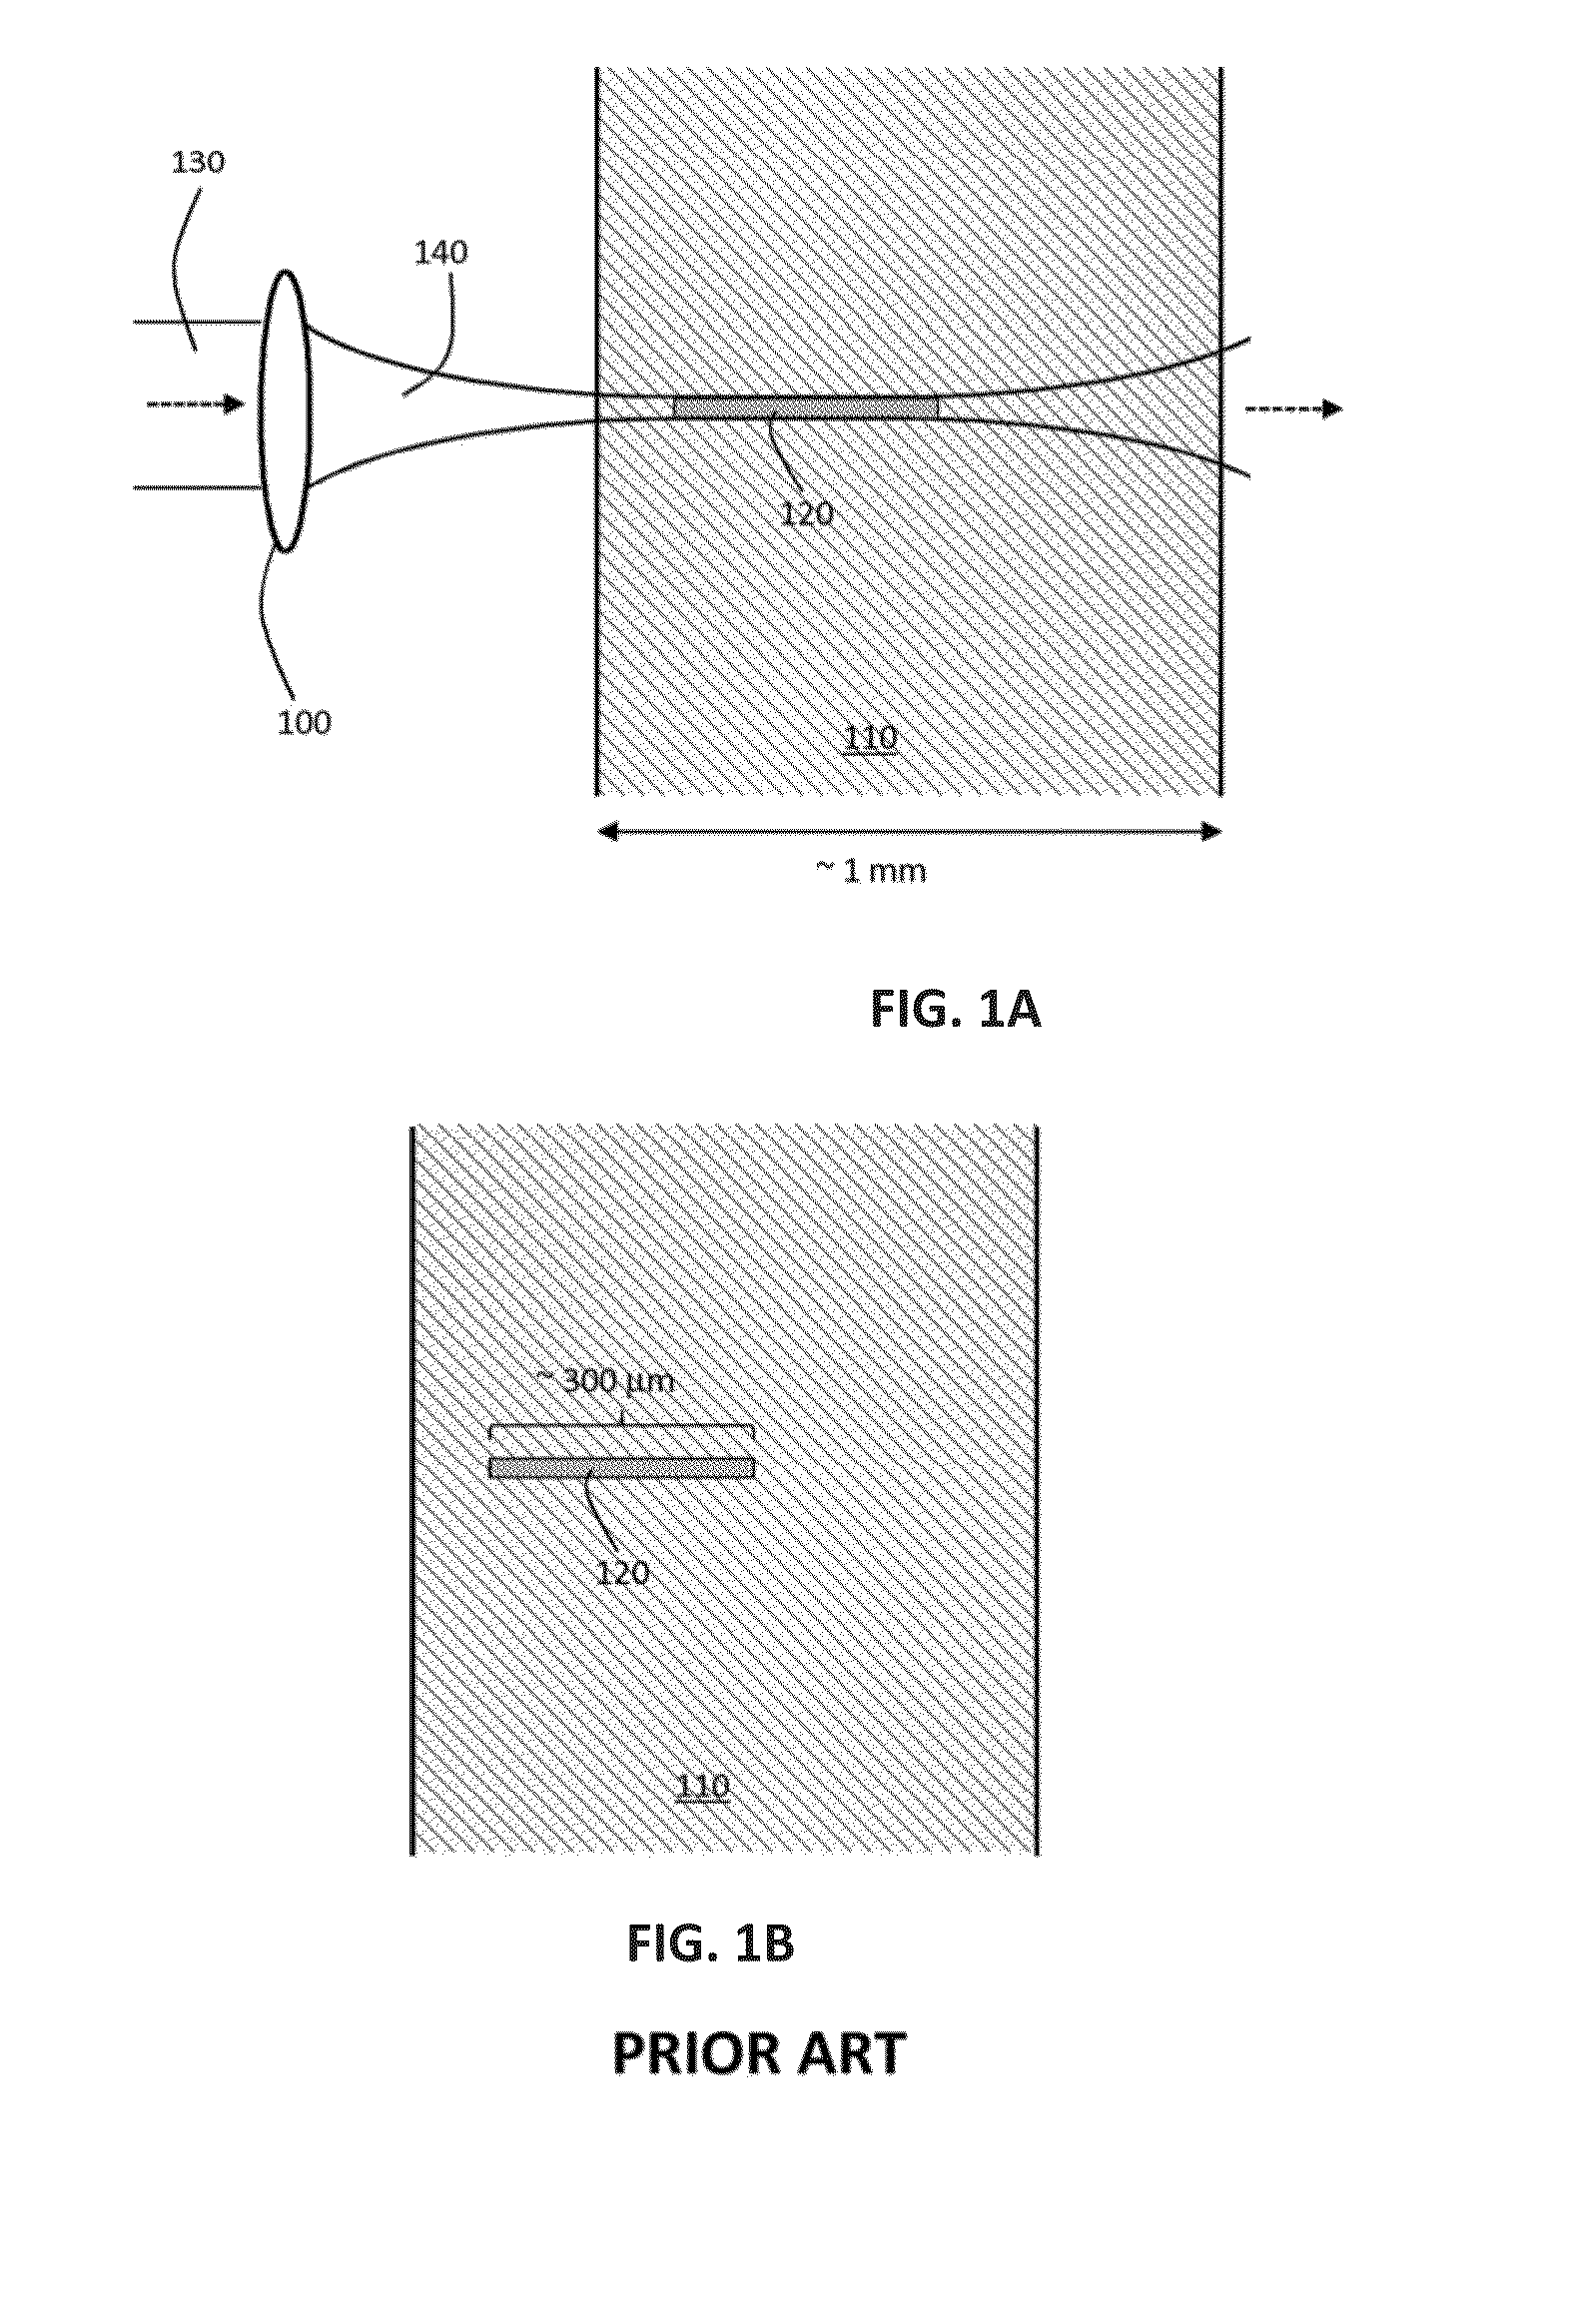 Method and apparatus for performing laser curved filamentation within transparent materials